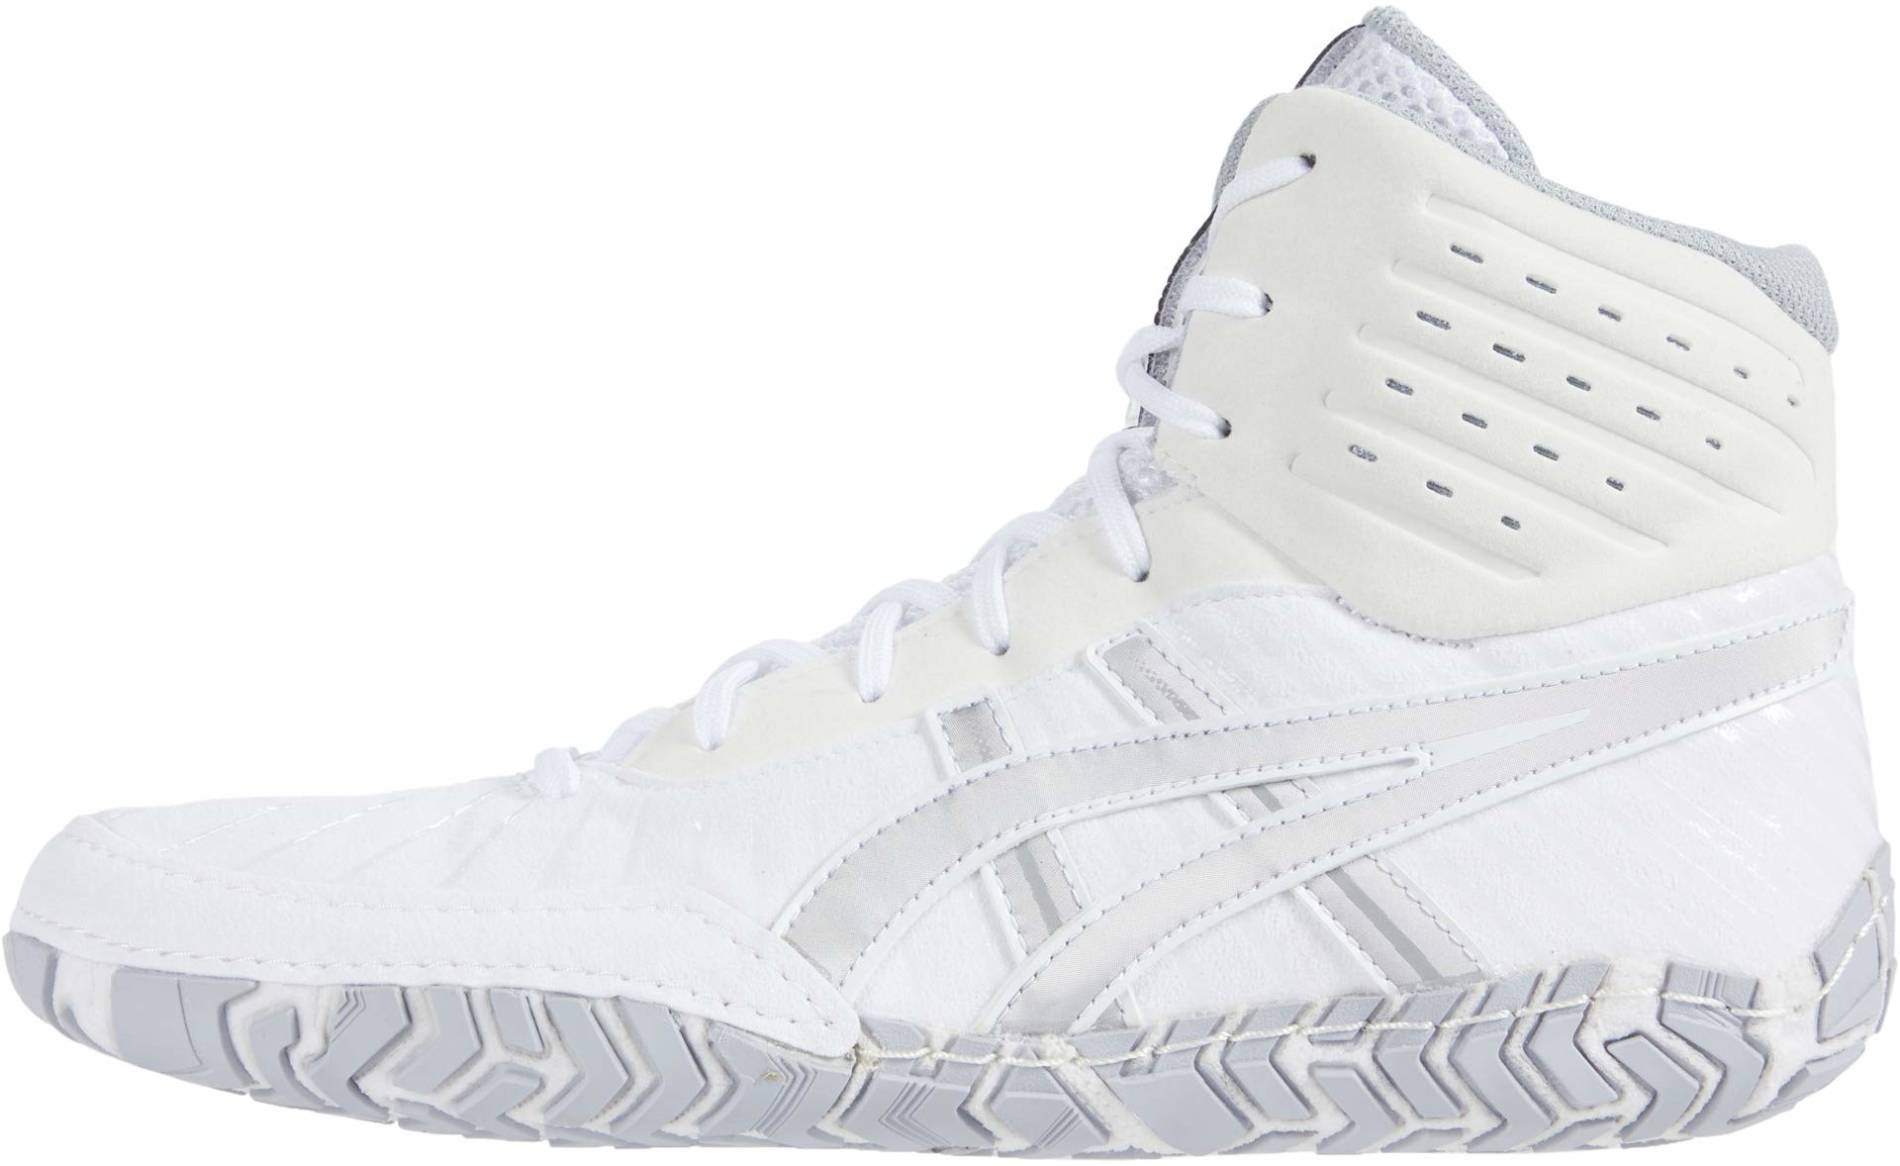 Save 32% on white wrestling shoes (14 